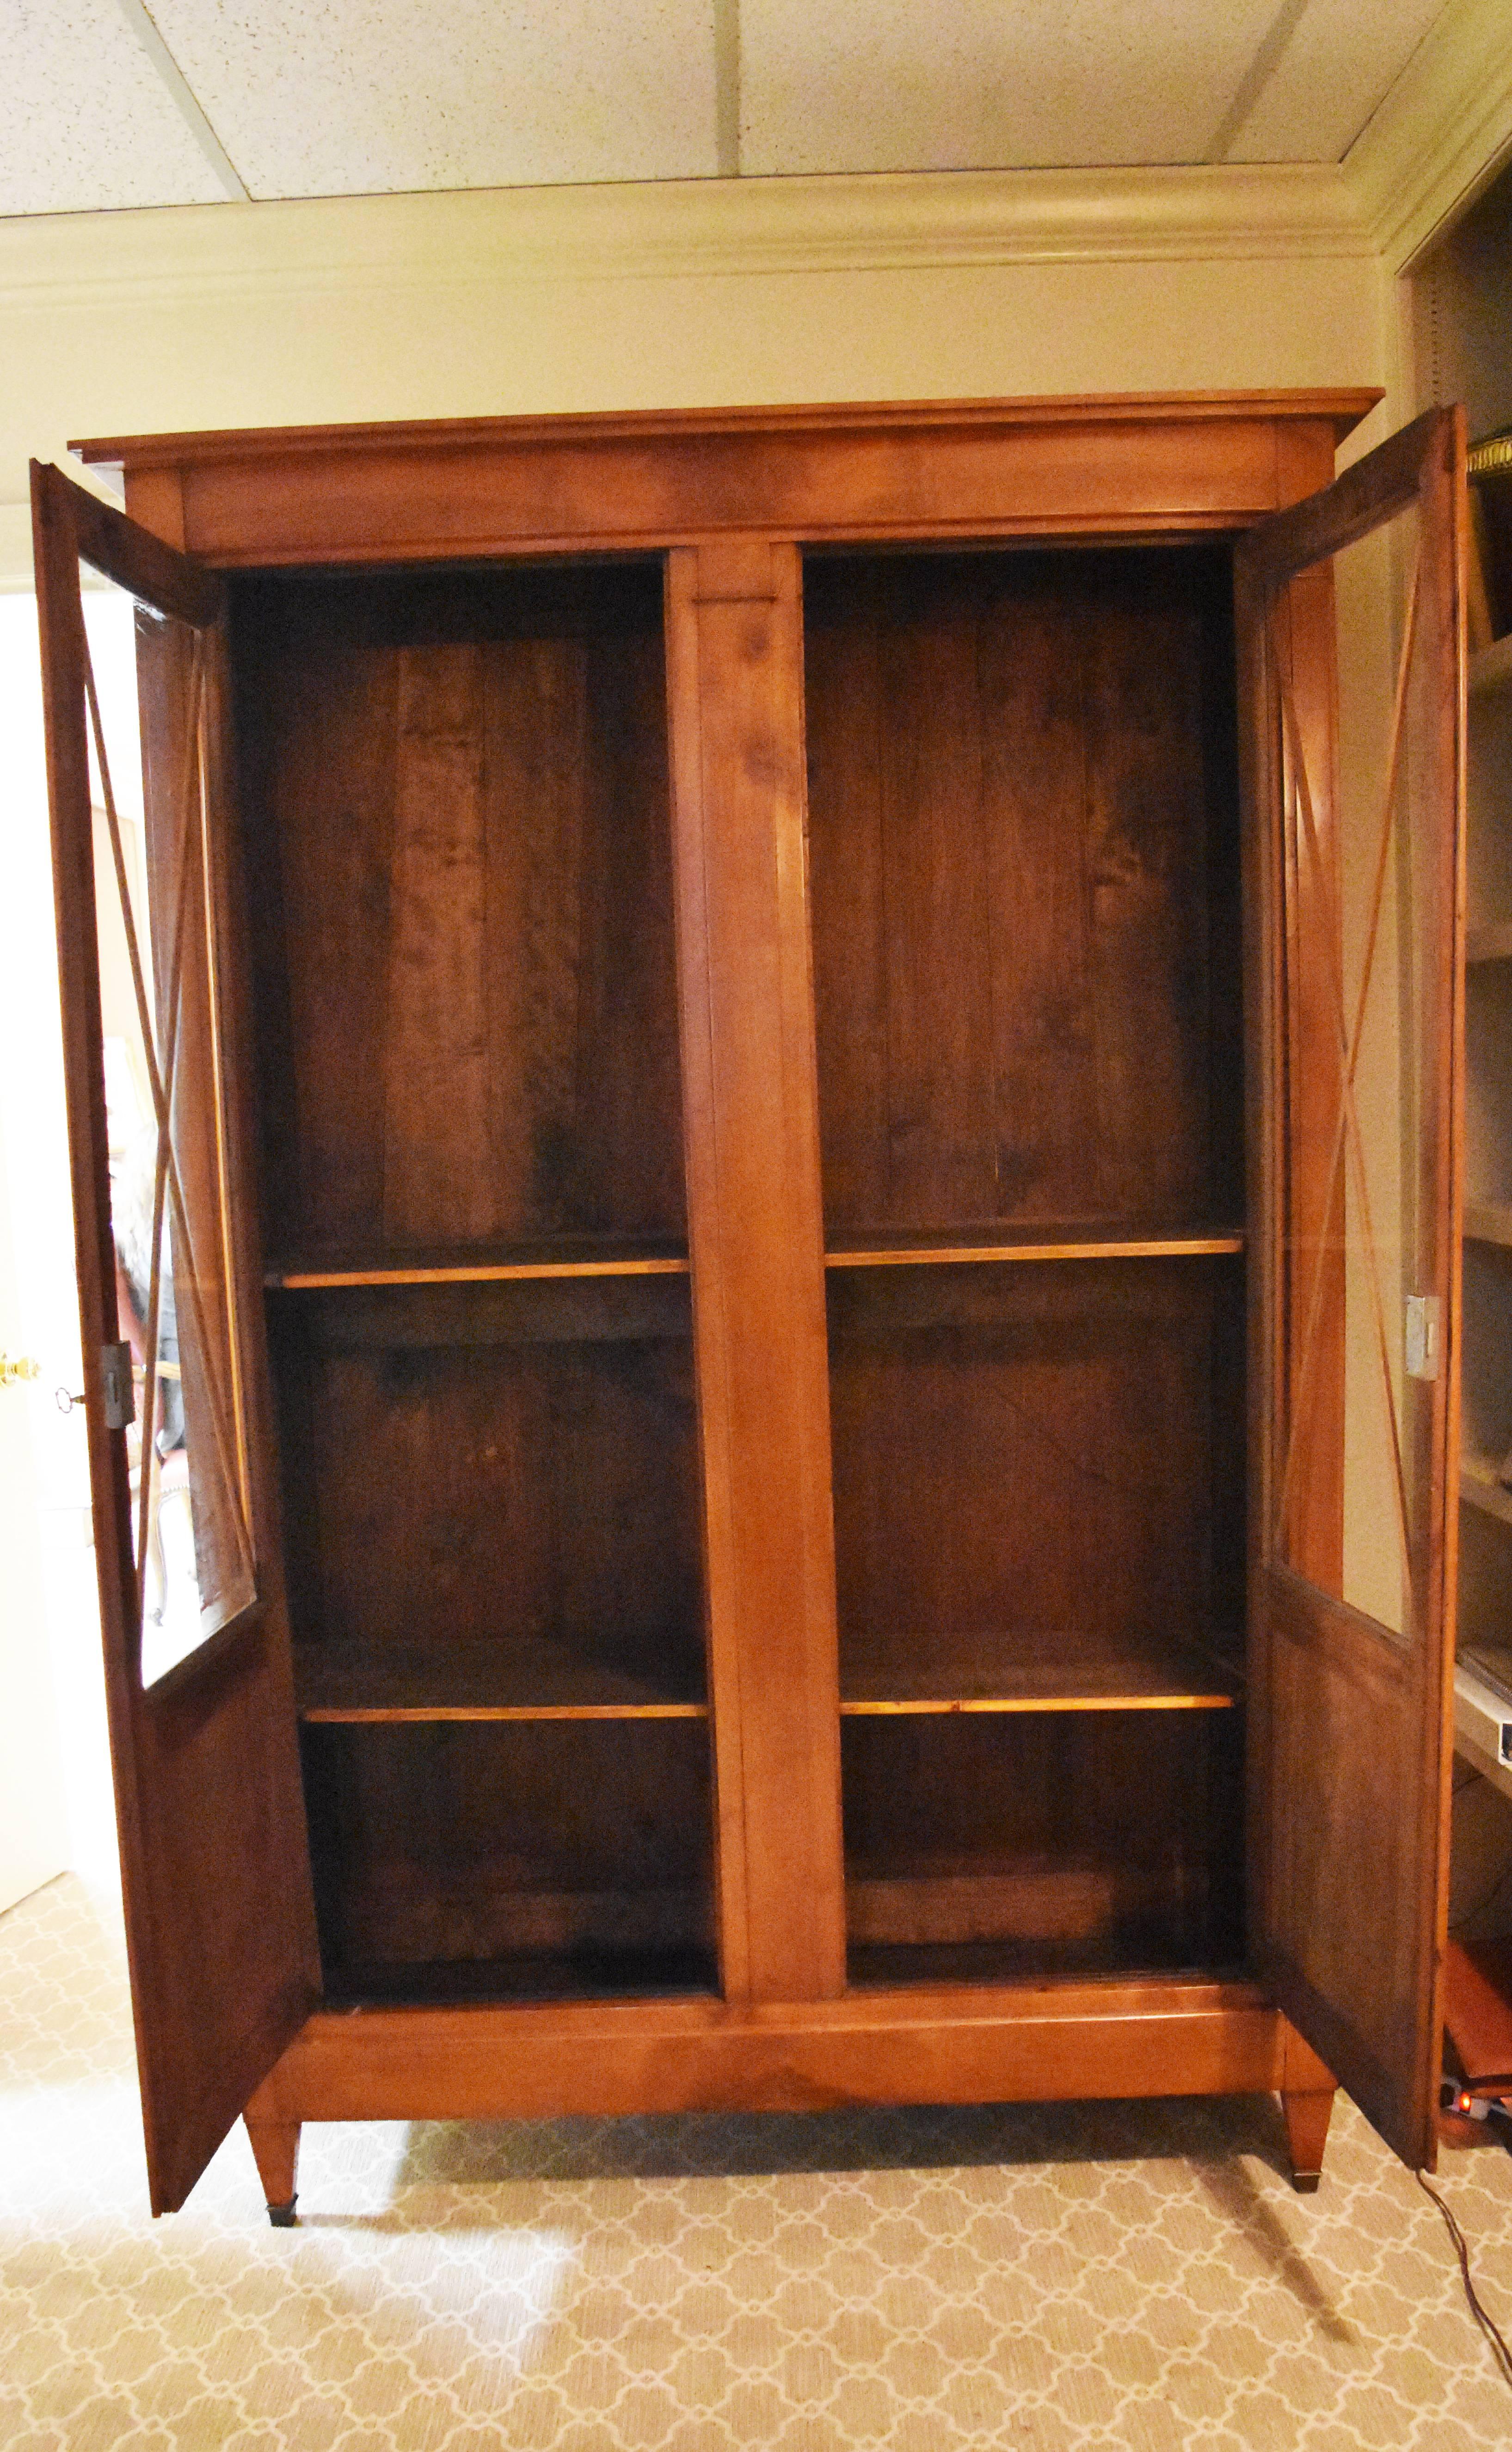 This 19th century Directoire style walnut bookcase features clean lines with two glass doors decorated with an 